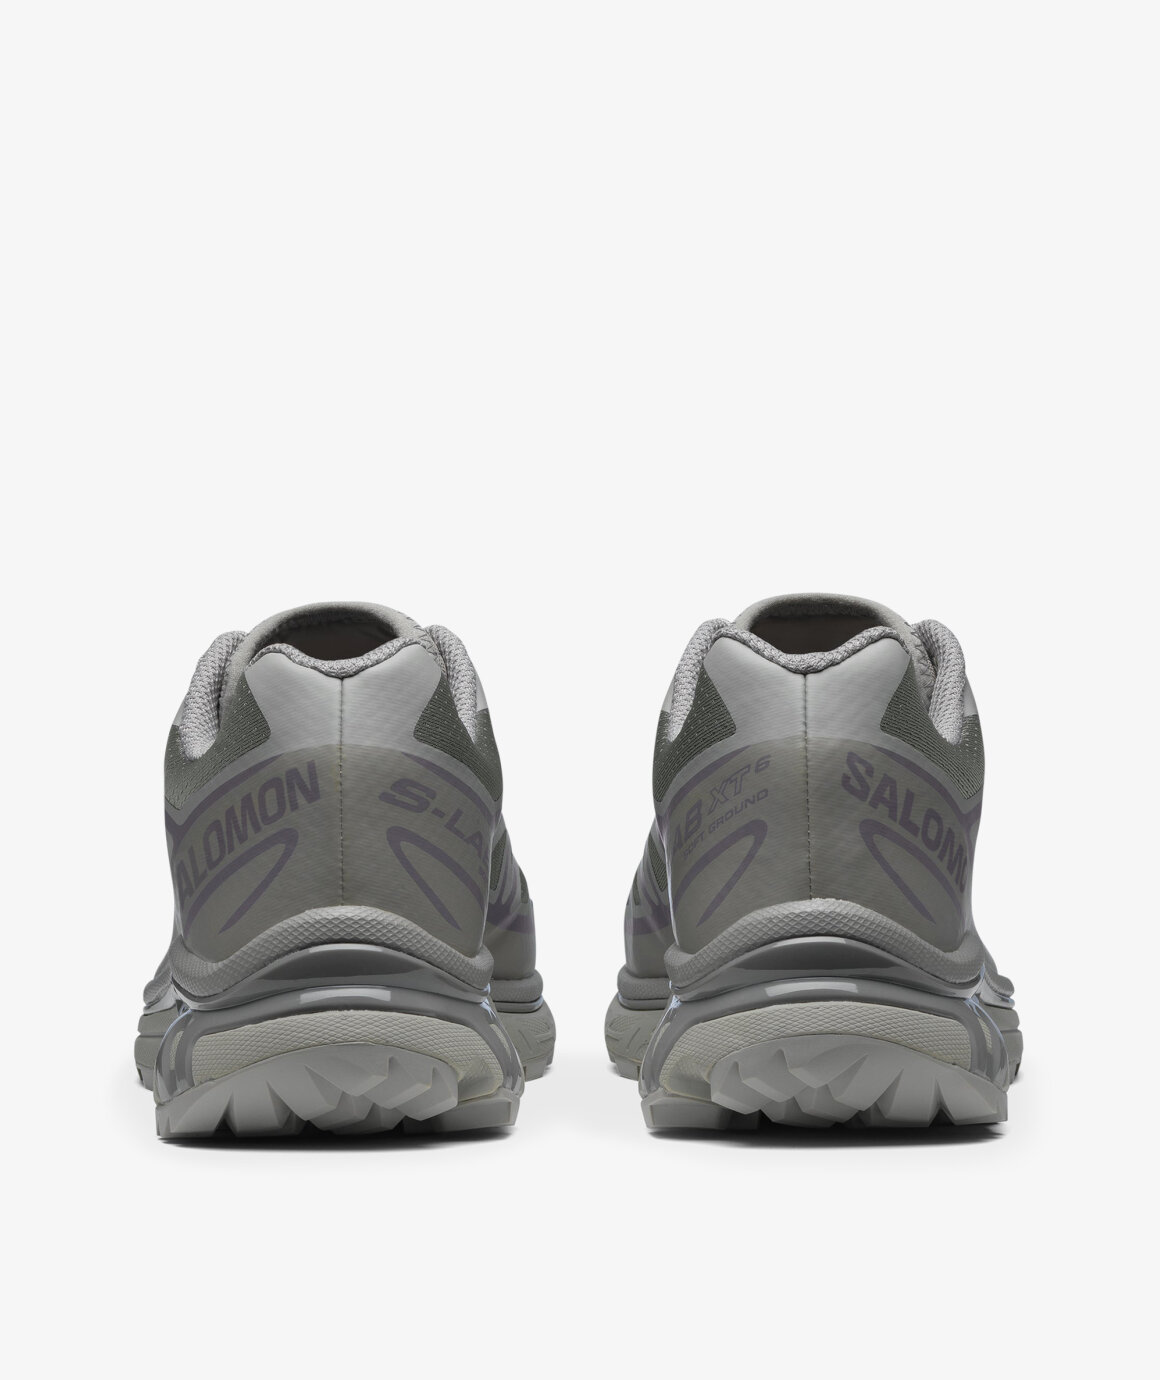 Norse Store | Shipping Worldwide - Salomon XT-6 - Ghost Gray/Ghost Gray ...